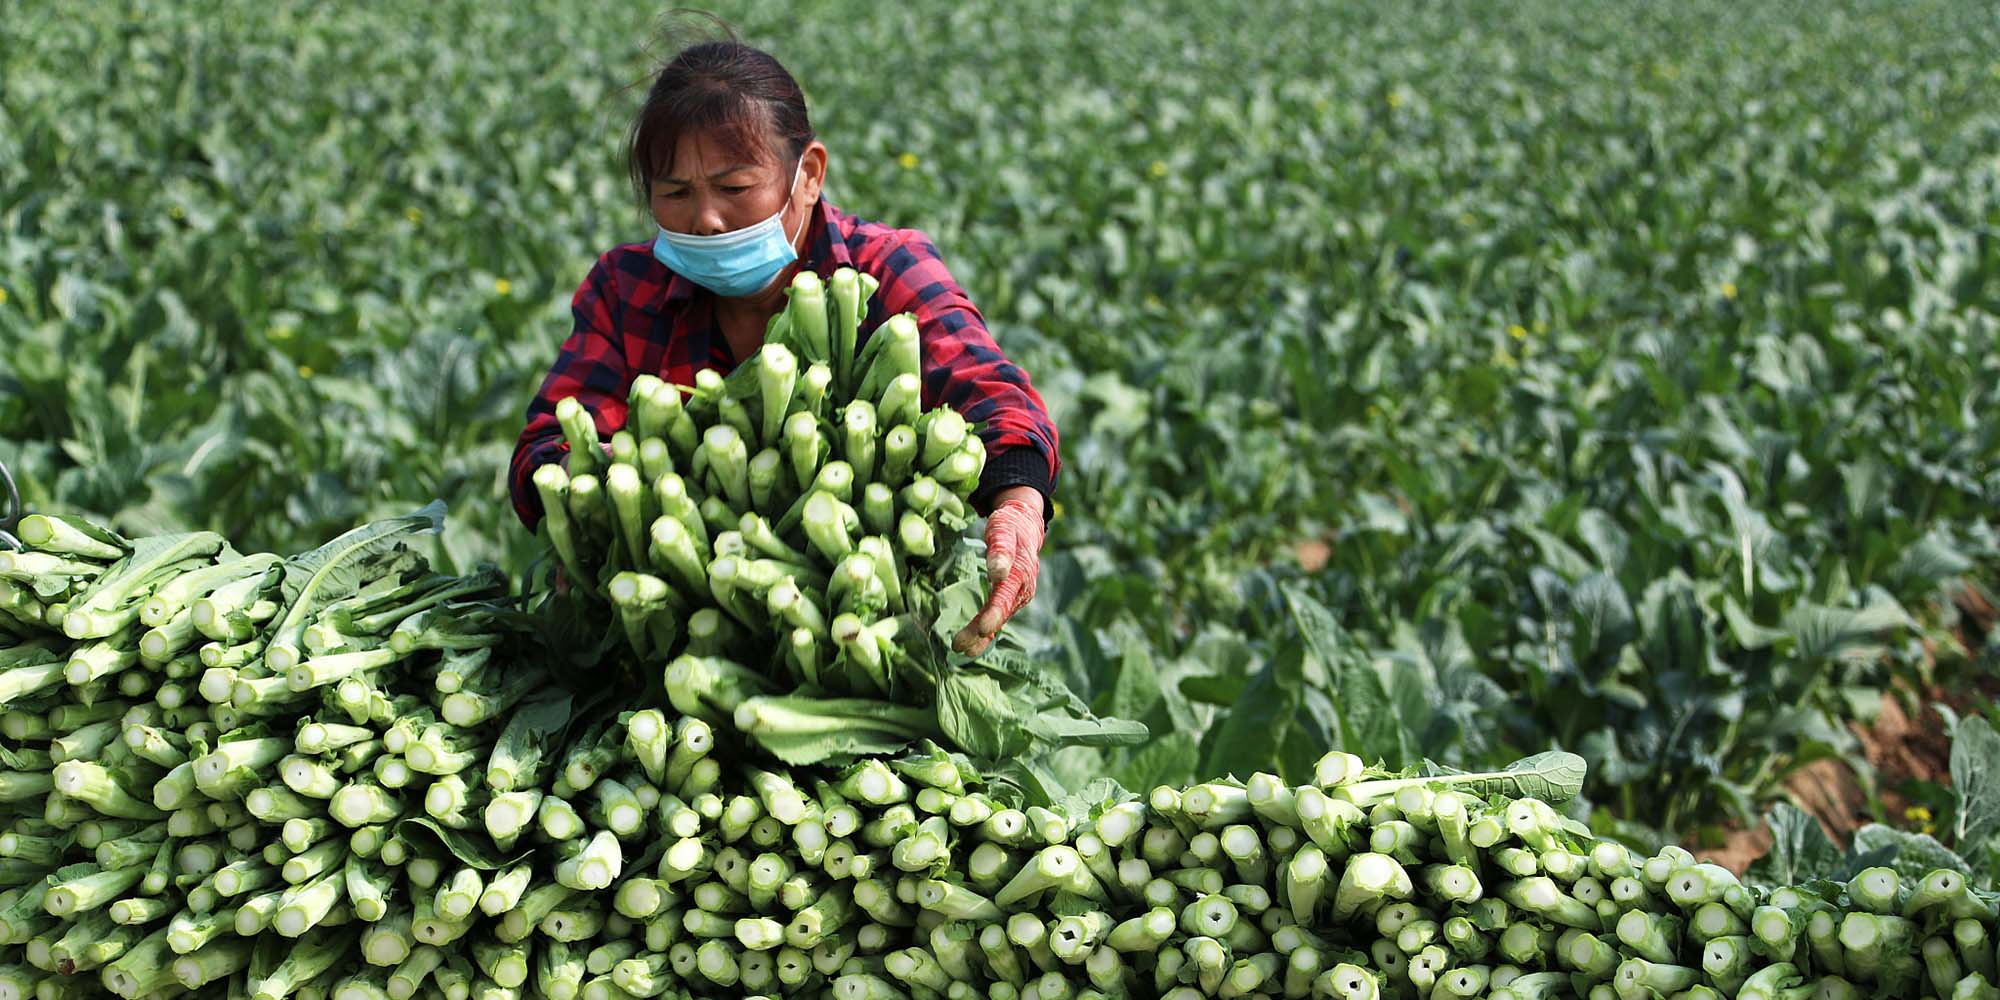 Vegetable Sales Tumble Amid COVID Curbs in China's Agriculture Hub - Sixth Tone